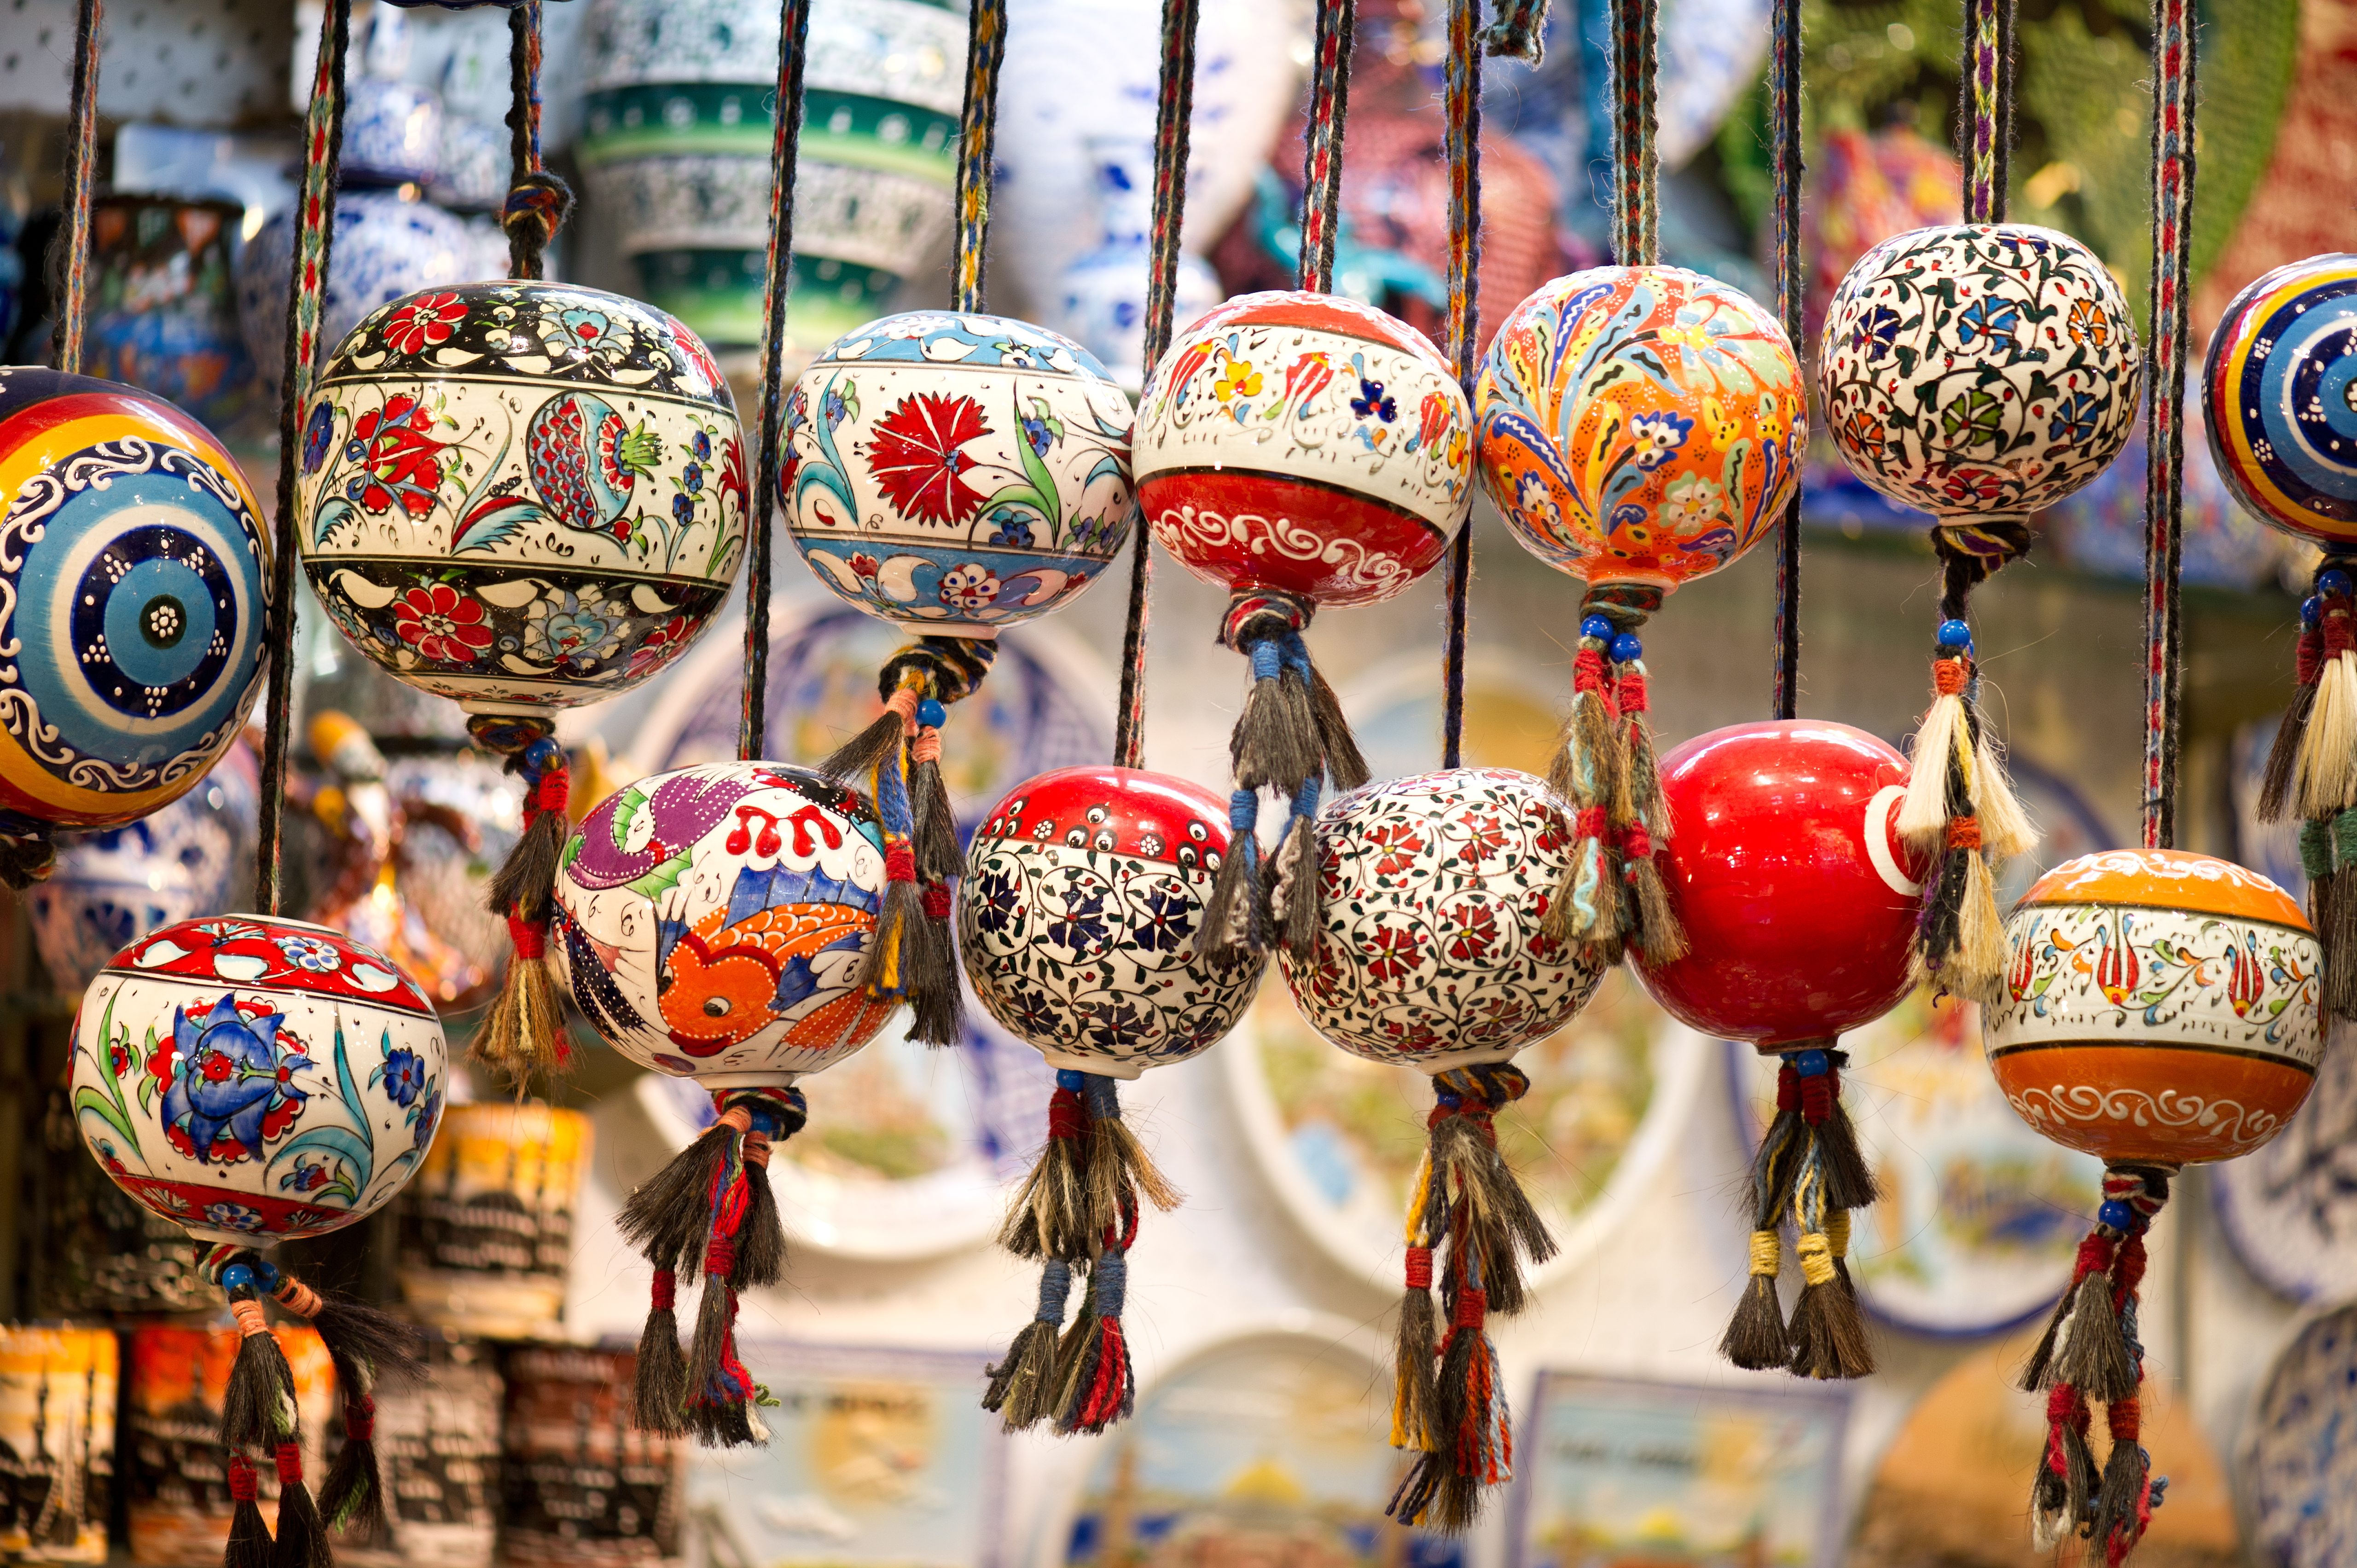 Grand Bazaar ornaments for sale in Istanbul, Turkey